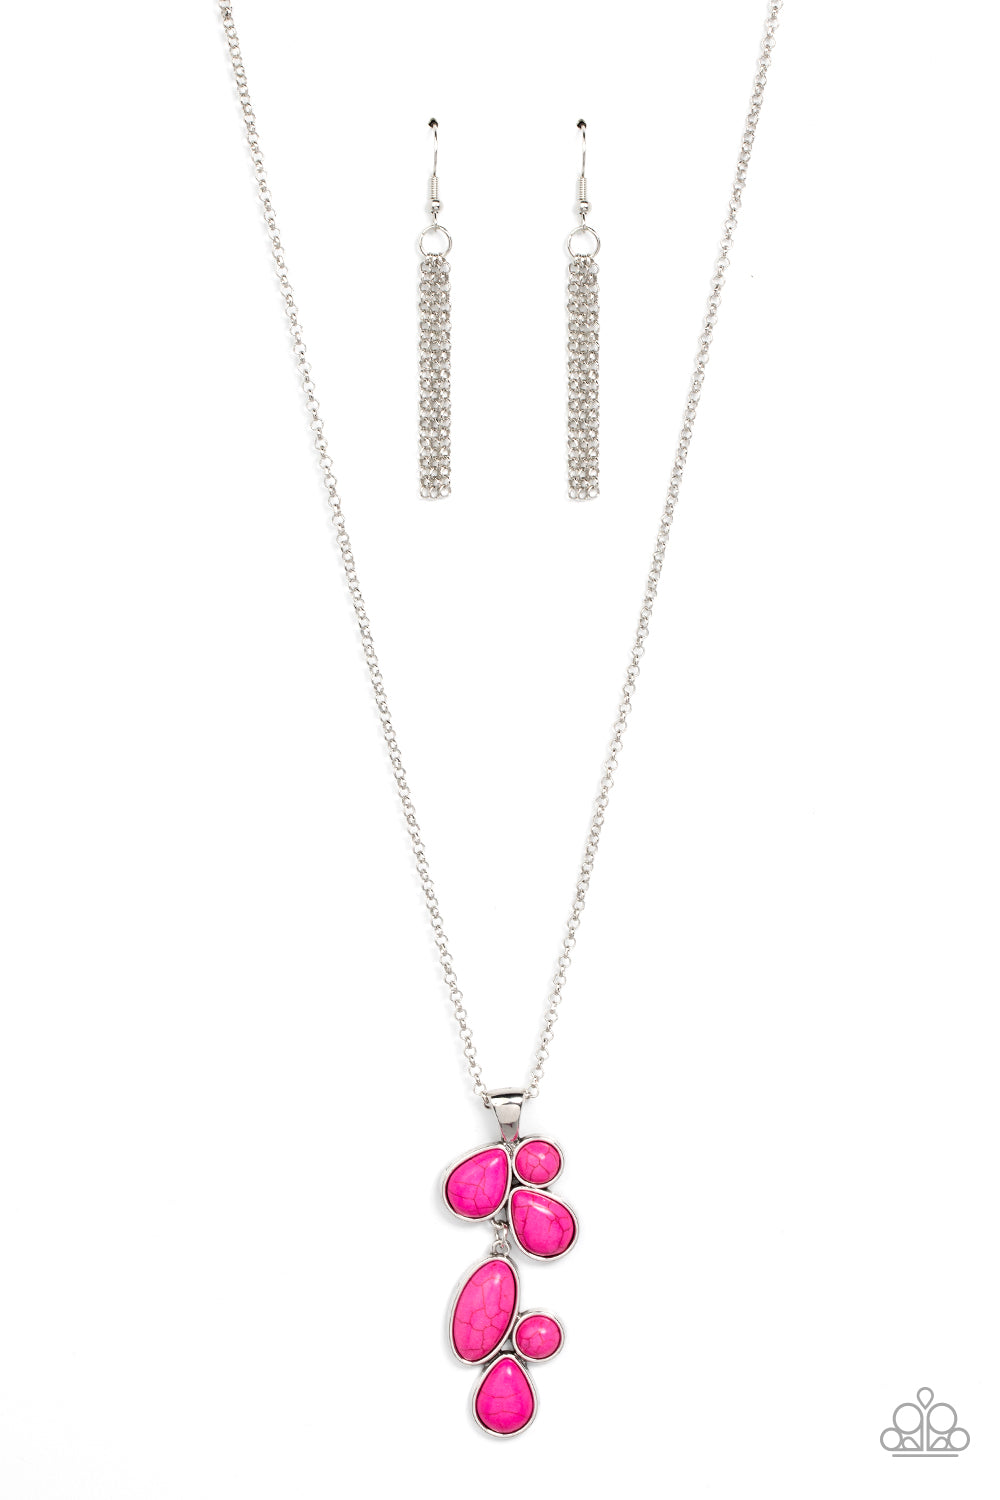 Wild Bunch Flair - pink - Paparazzi necklace